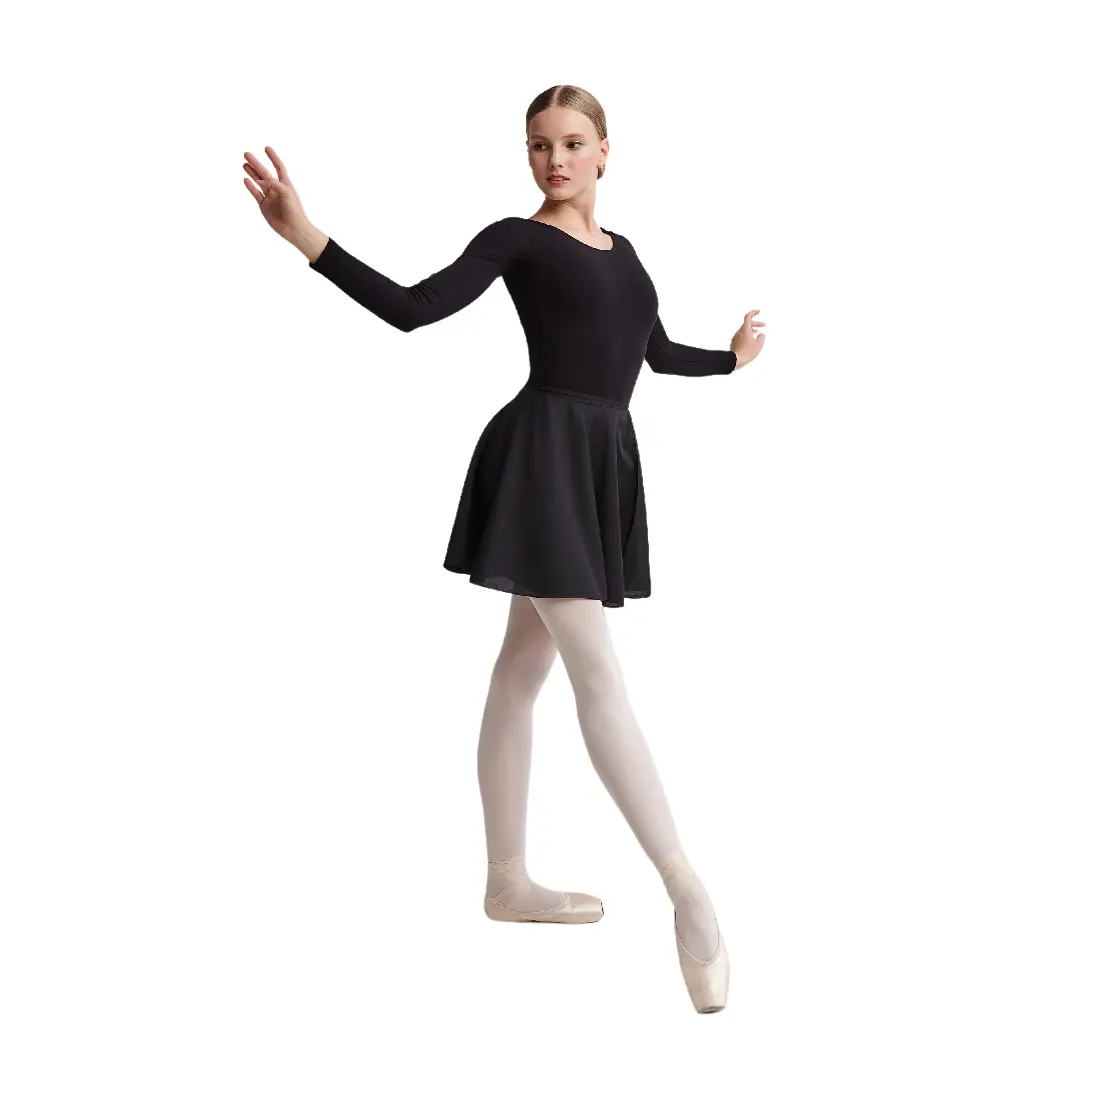 Great quality chiffon skirt for gymnastics and dance light and flowing, from manufacturer, sport dance skirts